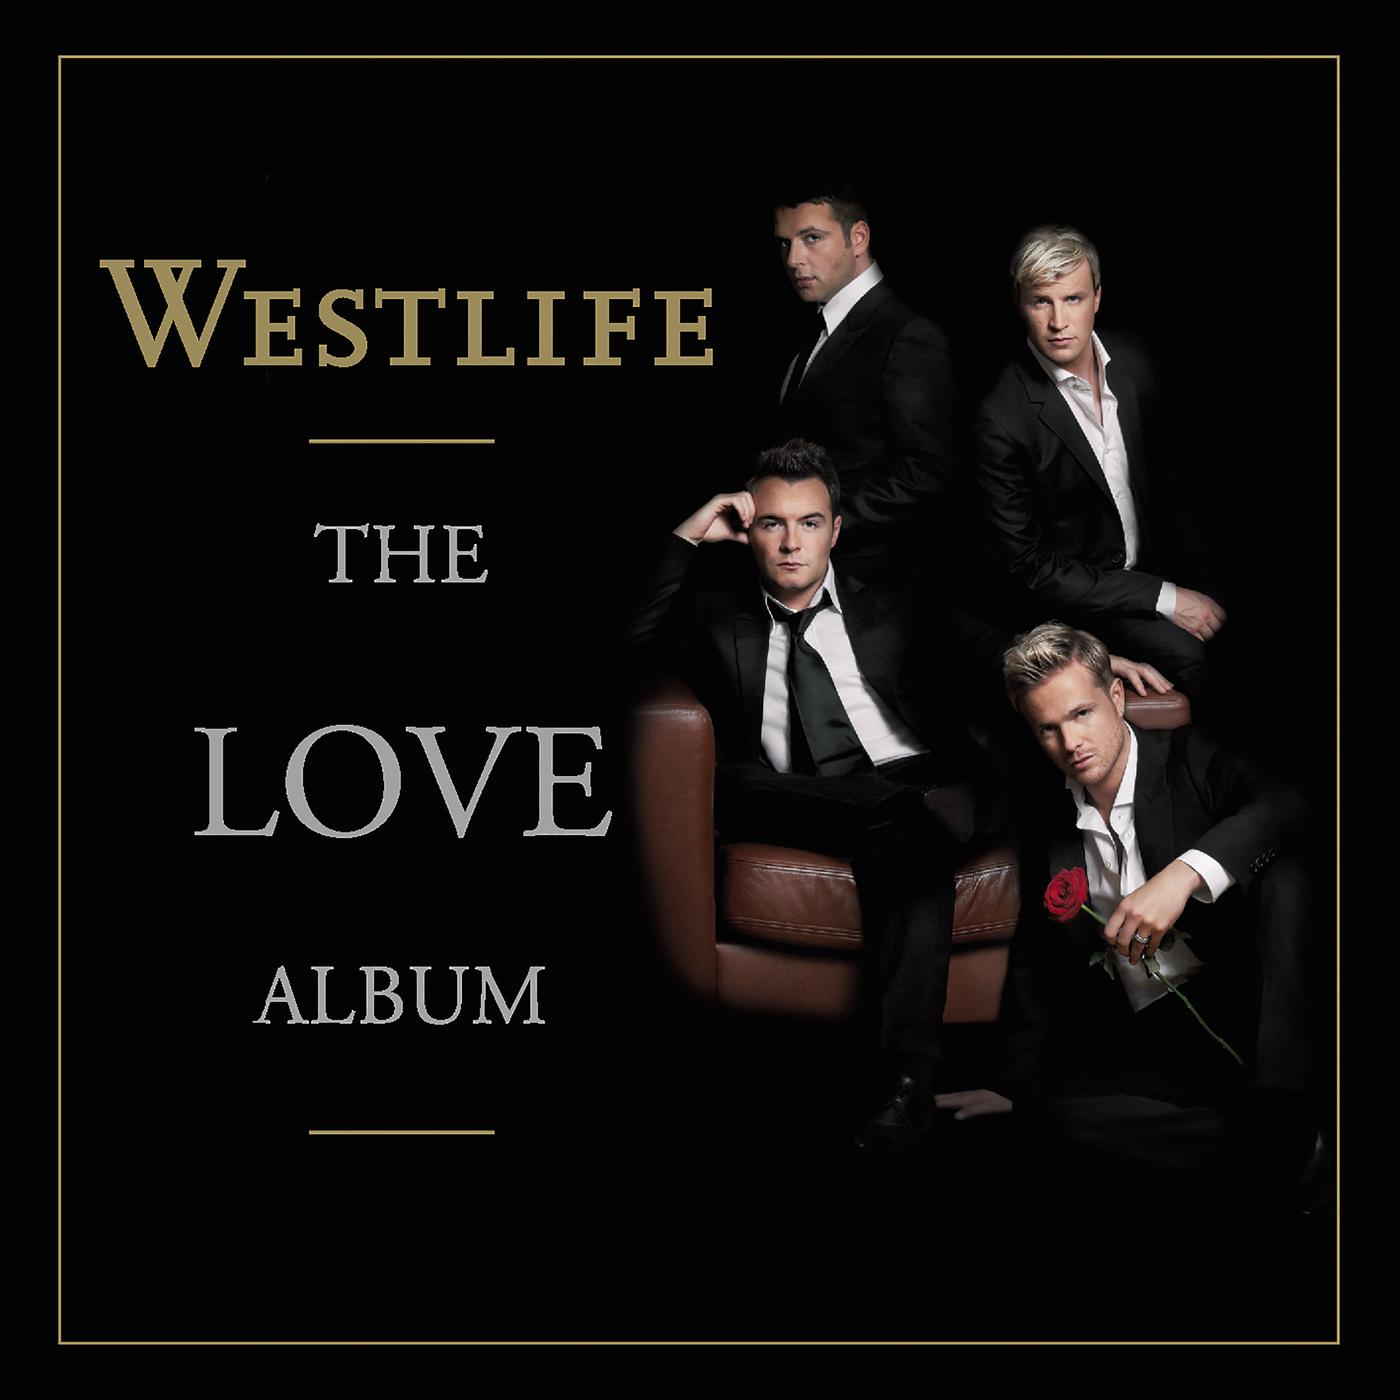 Nothing's Going to Change My Love For You歌词 歌手Westlife-专辑The Love Album-单曲《Nothing's Going to Change My Love For You》LRC歌词下载